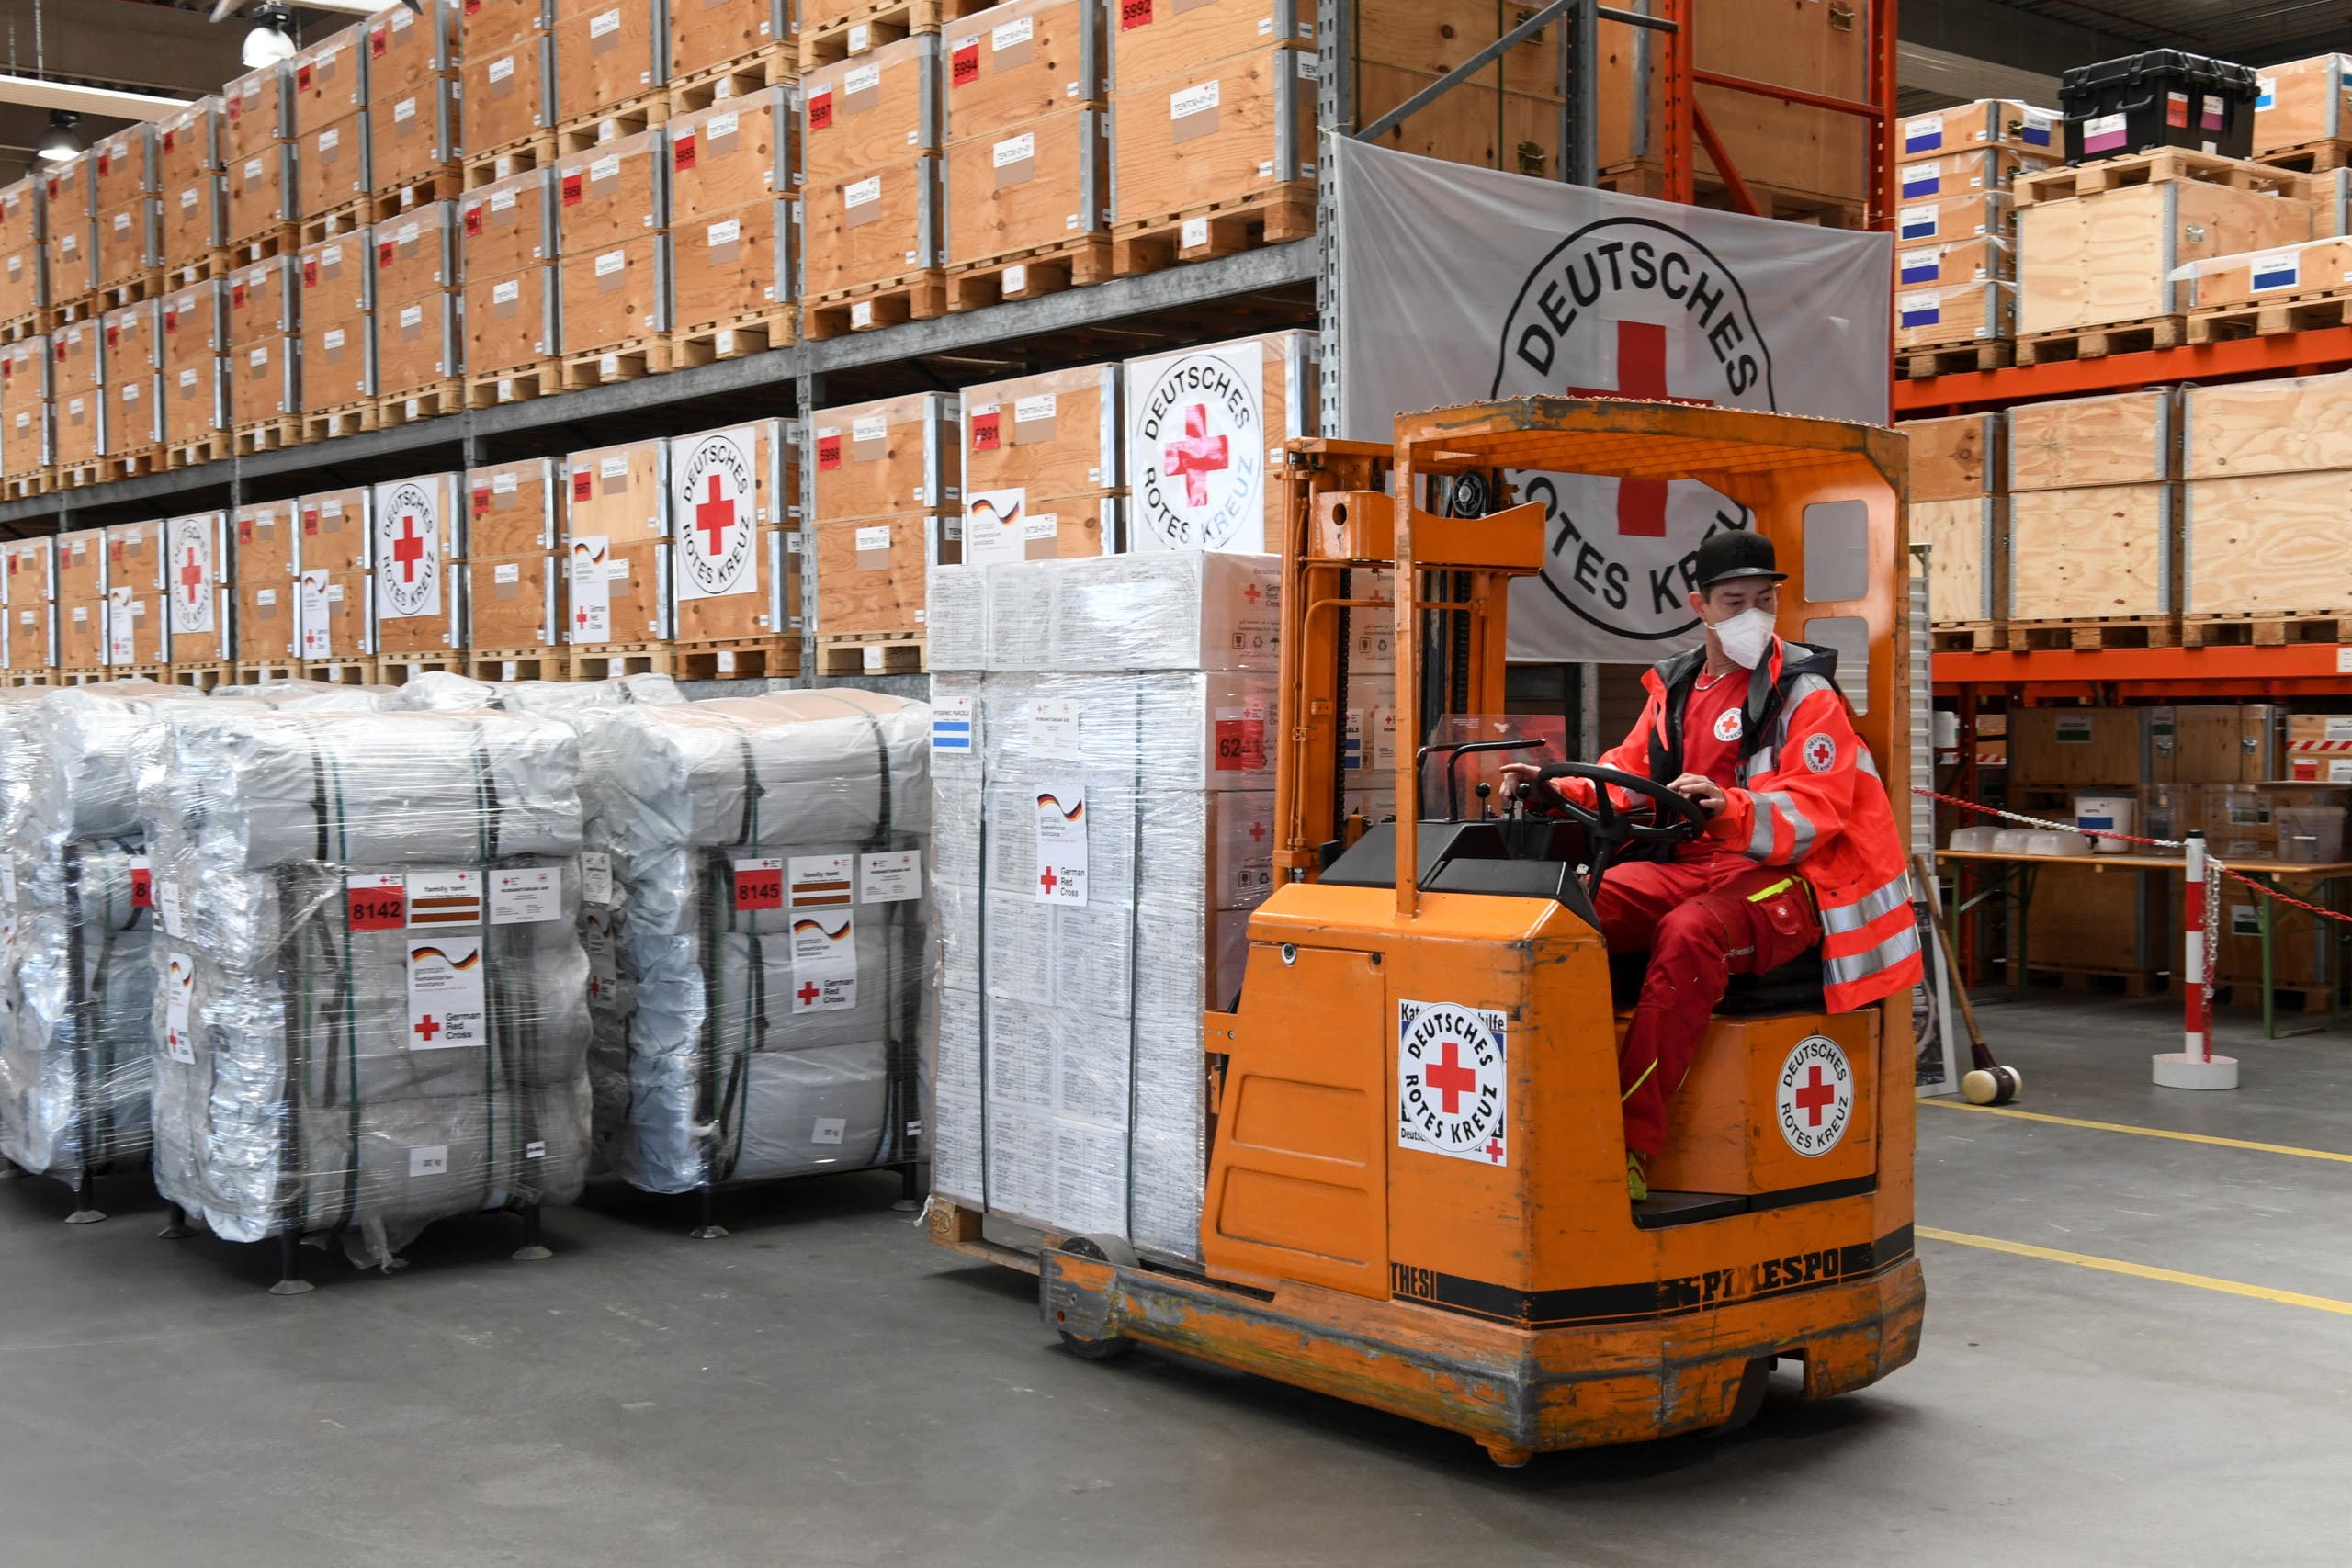 A German Red Cross (DRK) employee operates a forklift with humanitarian supplies to load for a first aid transport to Poland for those fleeing Russia's invasion in Ukraine, at the DRK logistics center in Schoenefeld near Berlin, Germany, March 1, 2022. (Reuters)